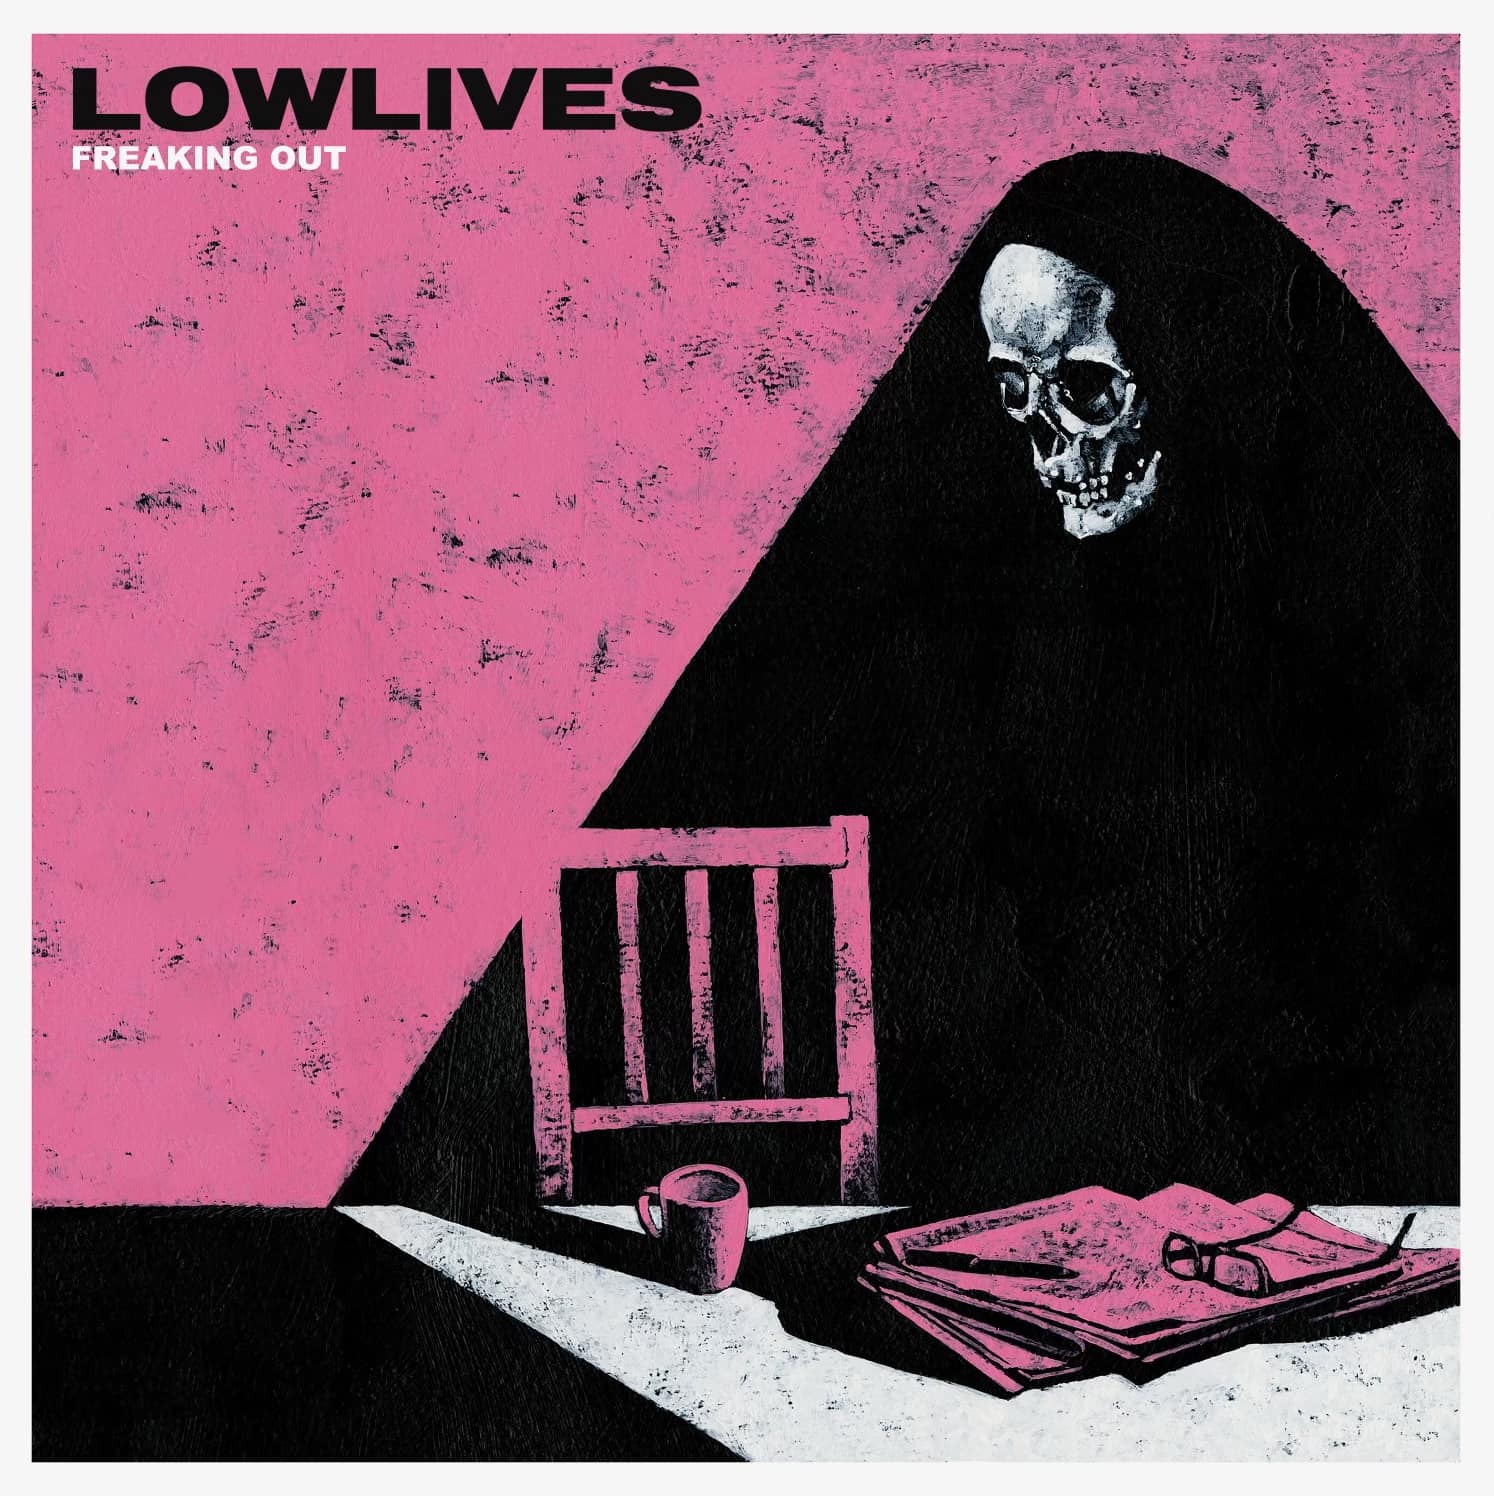 LOWLIVES - Freaking Out: CD